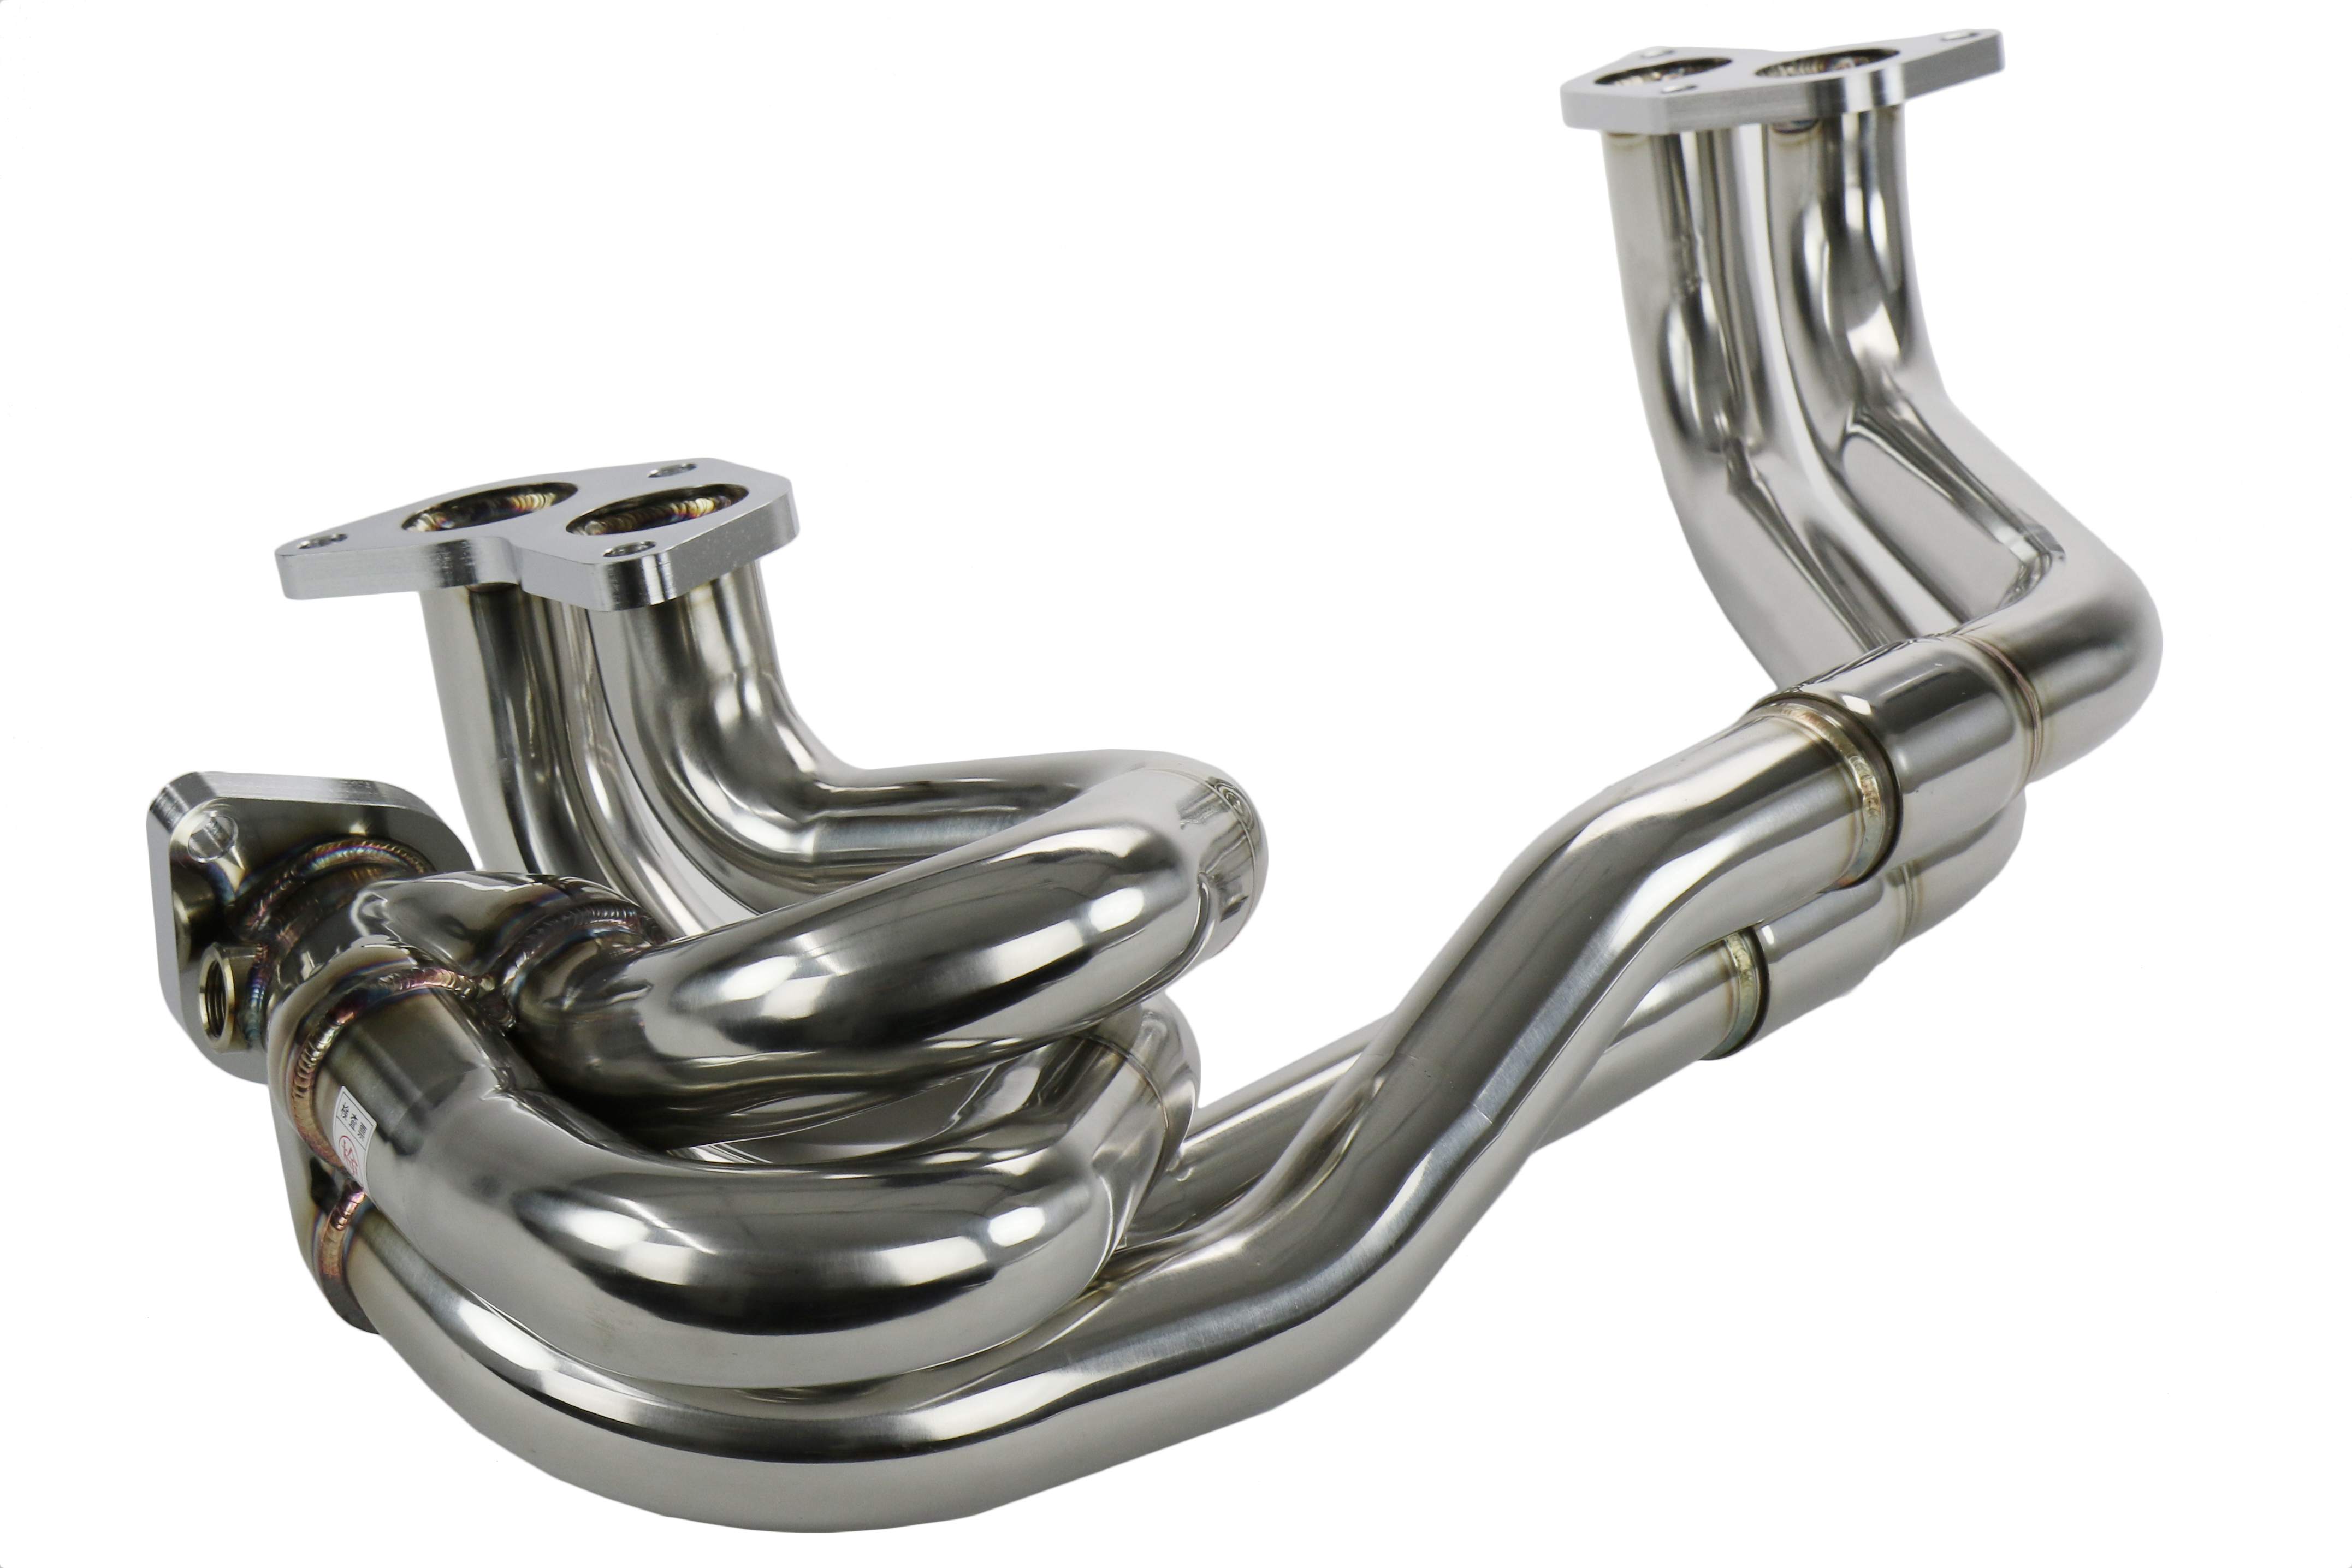 HKS Stainless Steel Exhaust Manifold